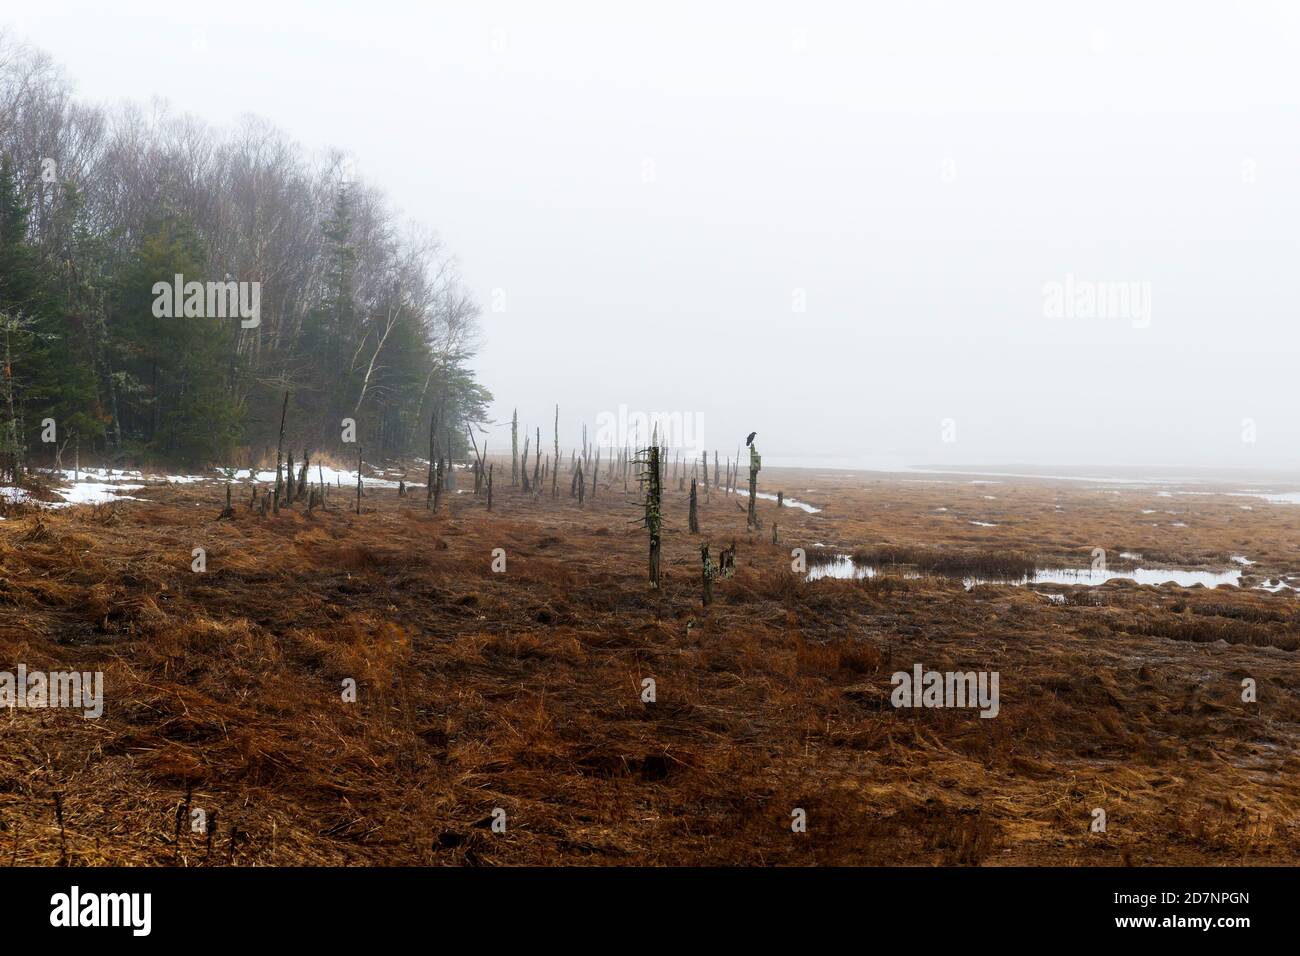 A marsh on a foggy day. There is woodland on the left, and dead tree trunks in the marsh. A single crow stands on a dead trunk. There is a bit of snow Stock Photo